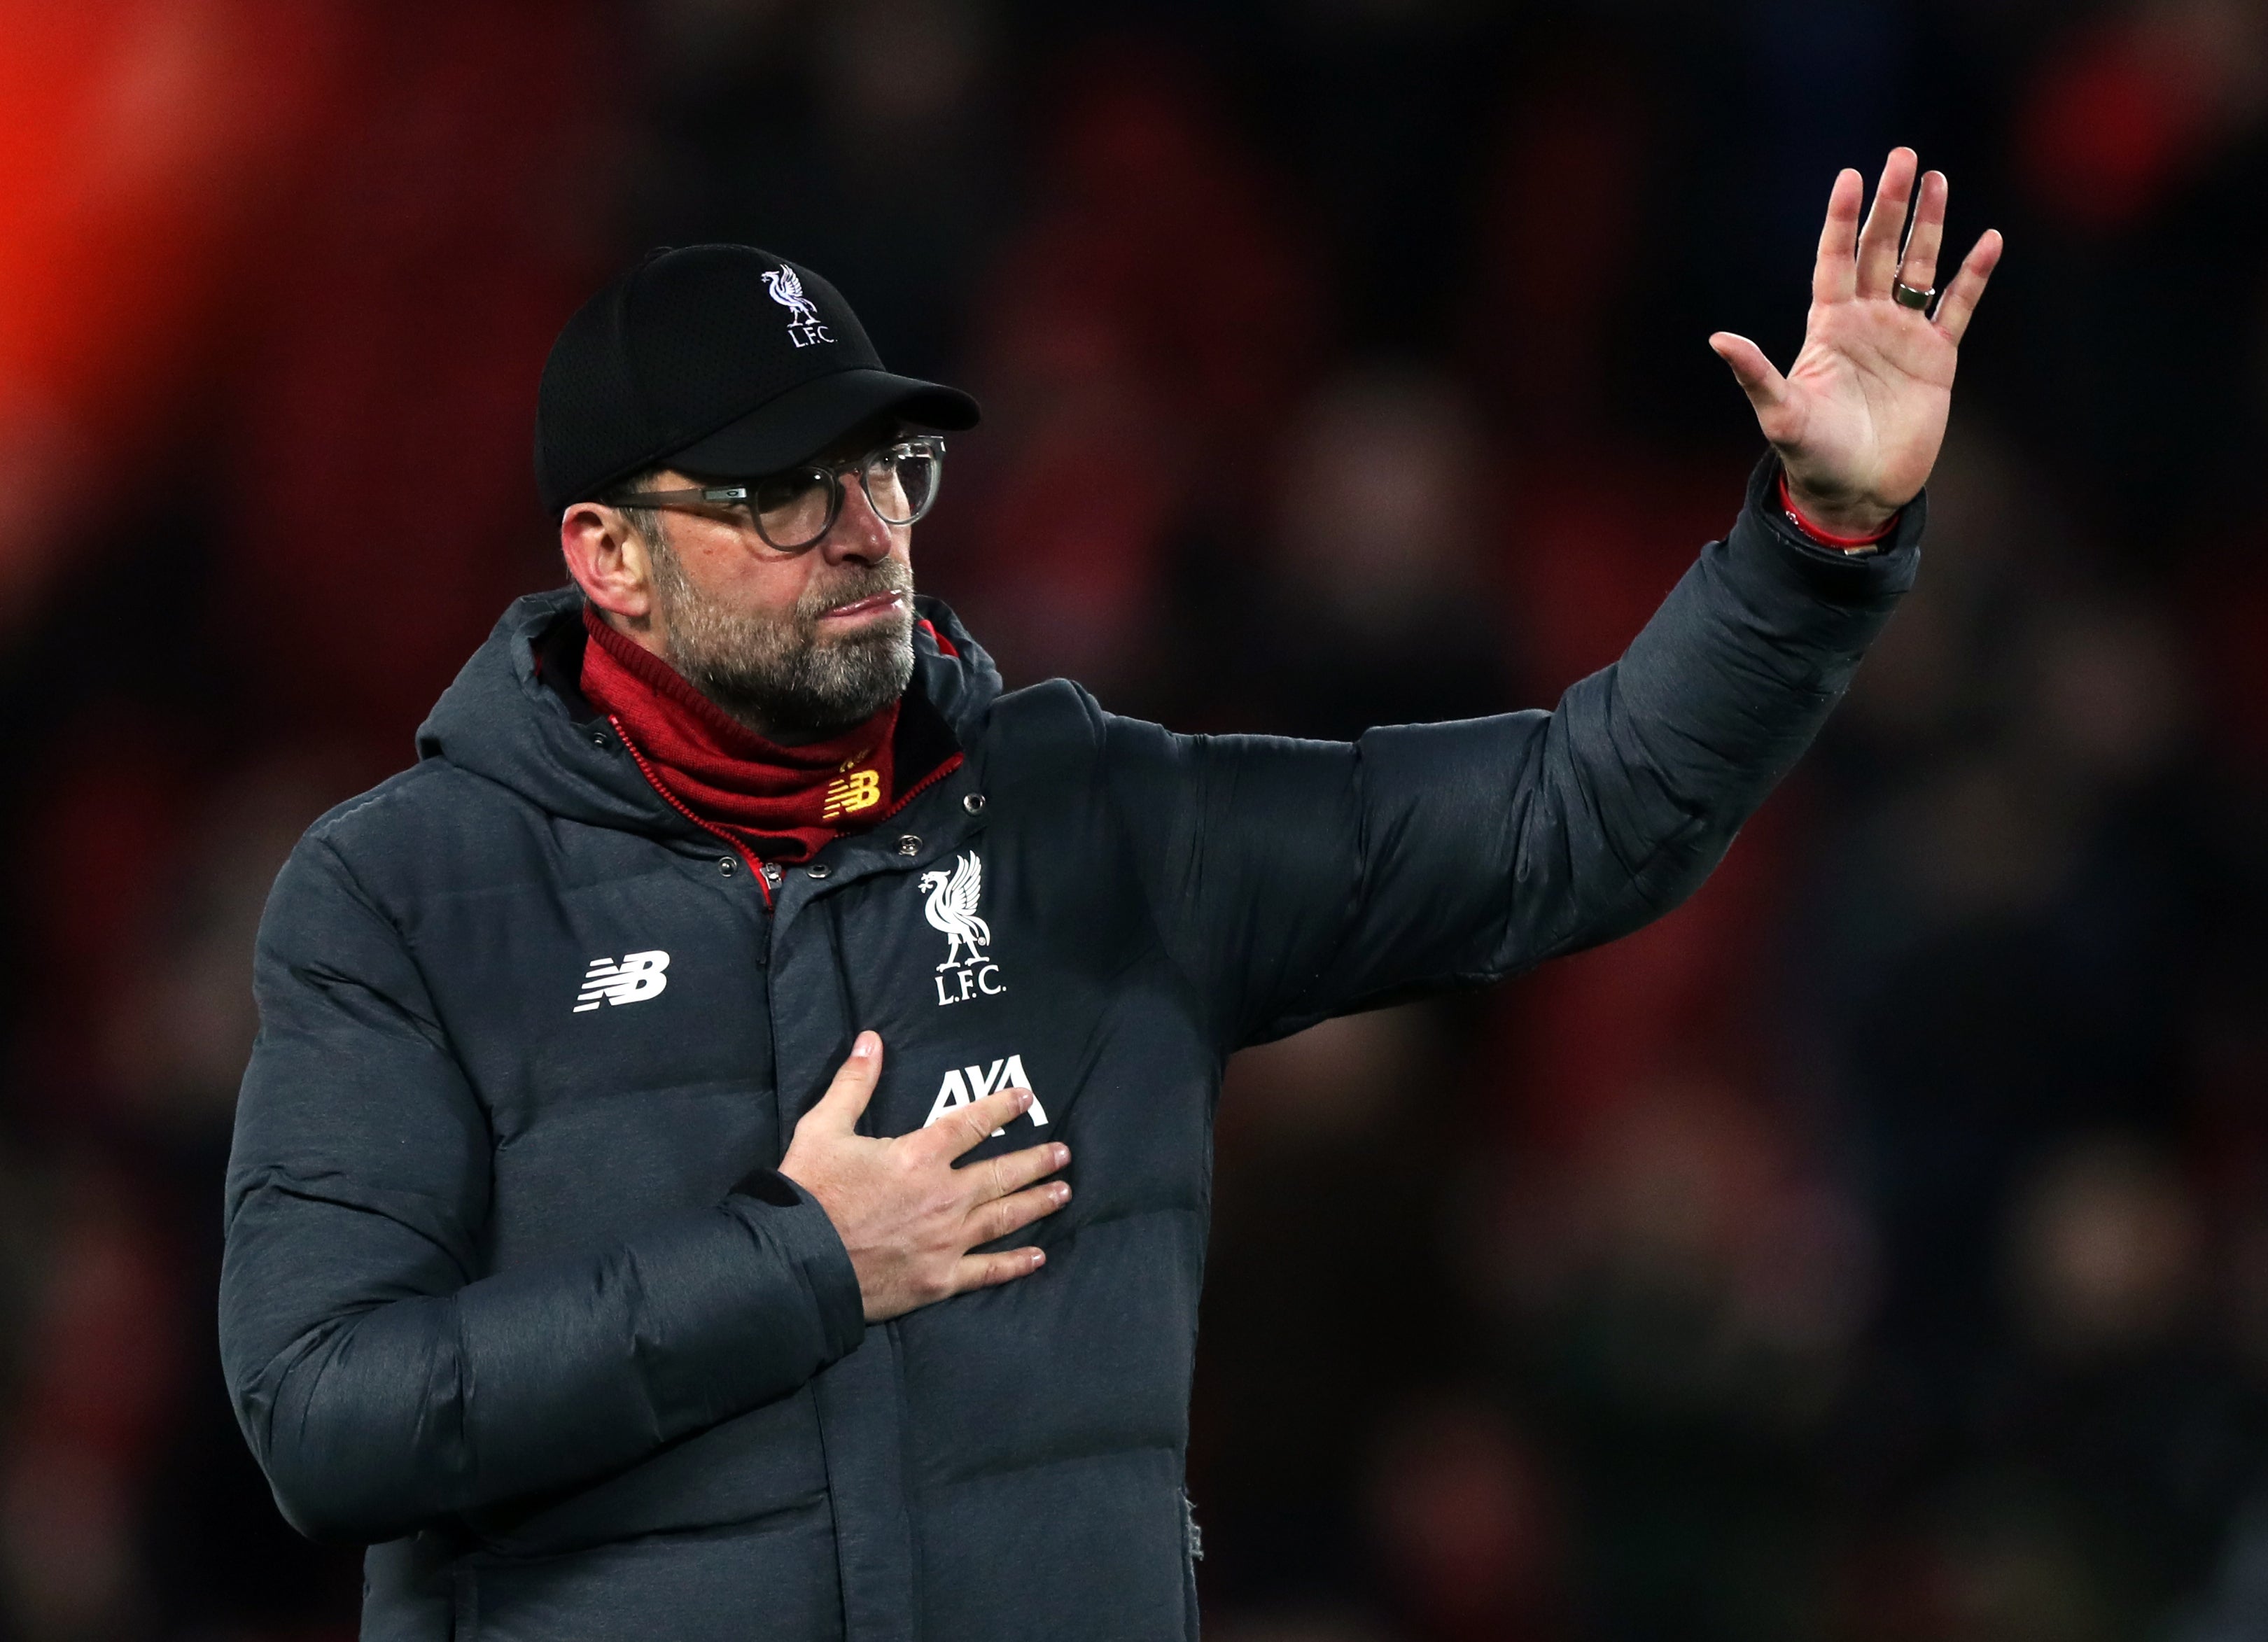 Liverpool manager Jurgen Klopp spoke out about homophobic abuse of Norwich midfielder Billy Gilmour. (Peter Byrne/PA)